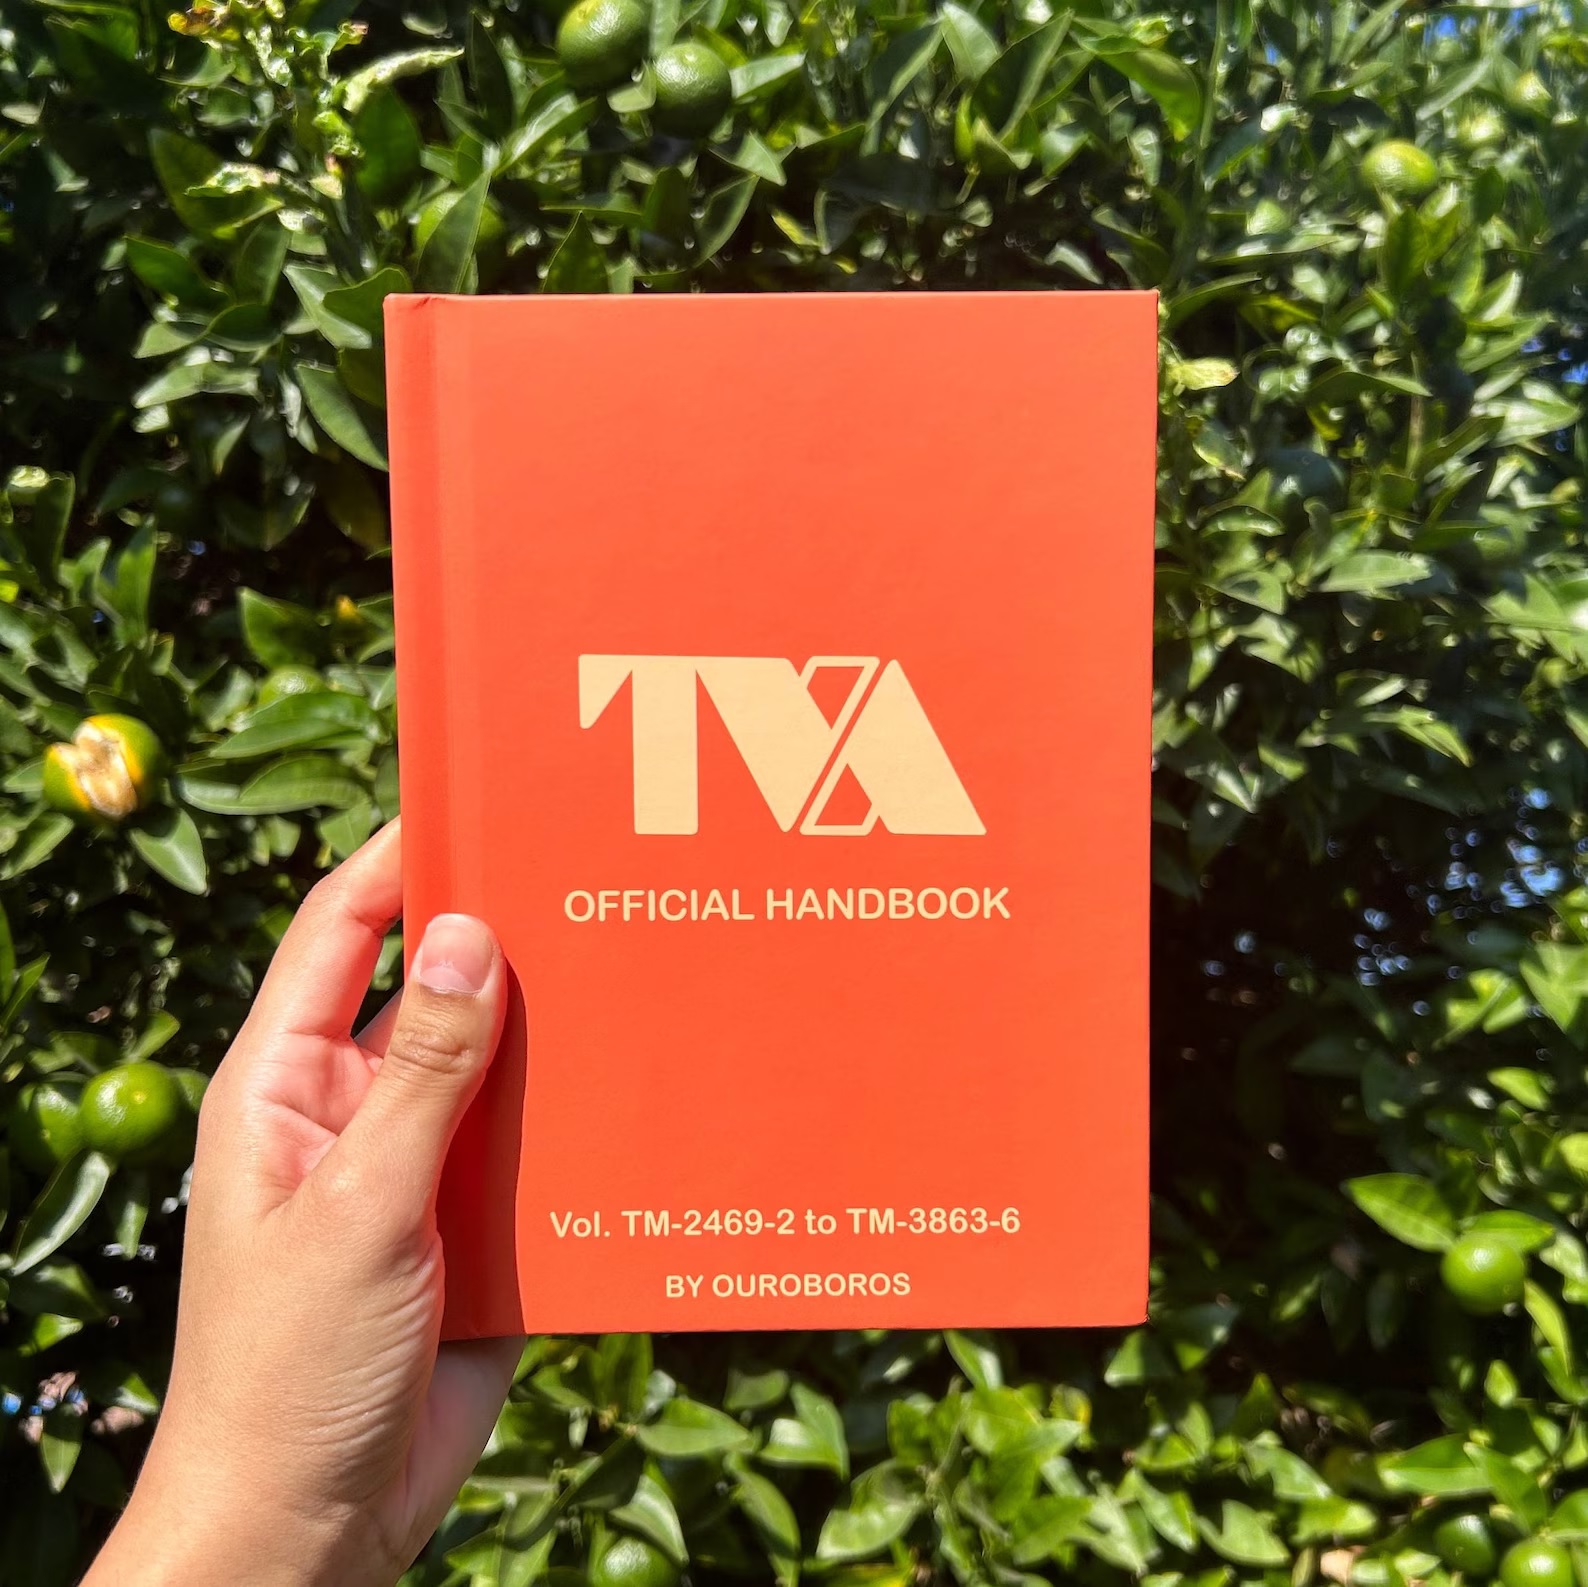 A hand holds up an orange journal with the words "TVA Official Handbook" written in gold in the center. At the bottom, also in gold, are volume numbers and the words "by Ouroboros."